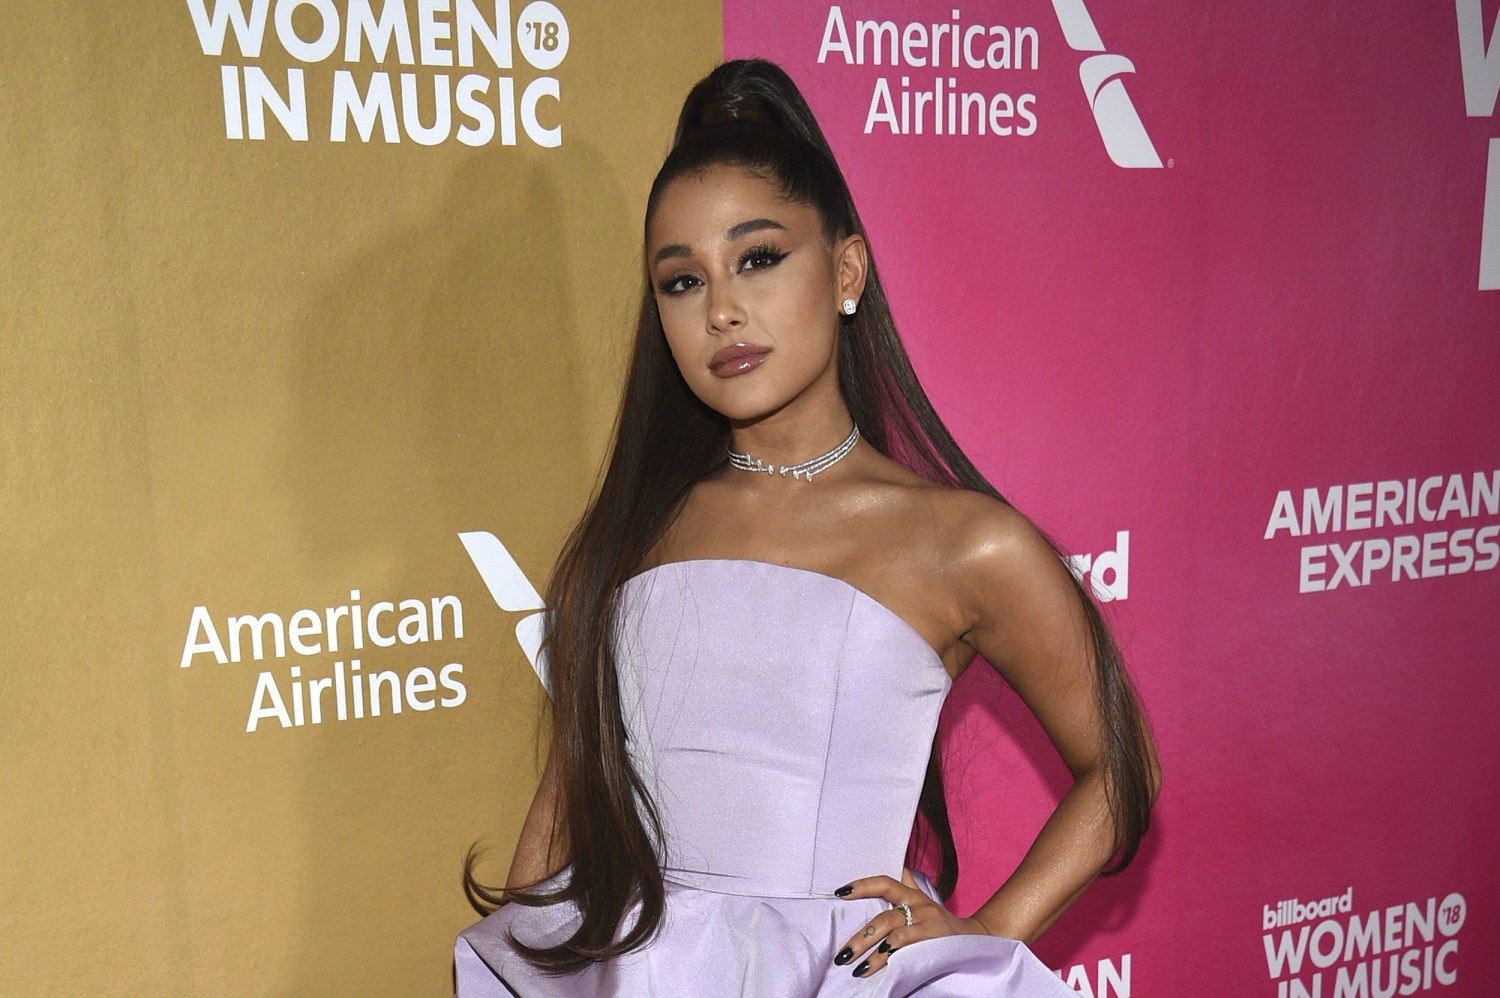 Ariana Grande Reportedly Caused an Increase in Searches for